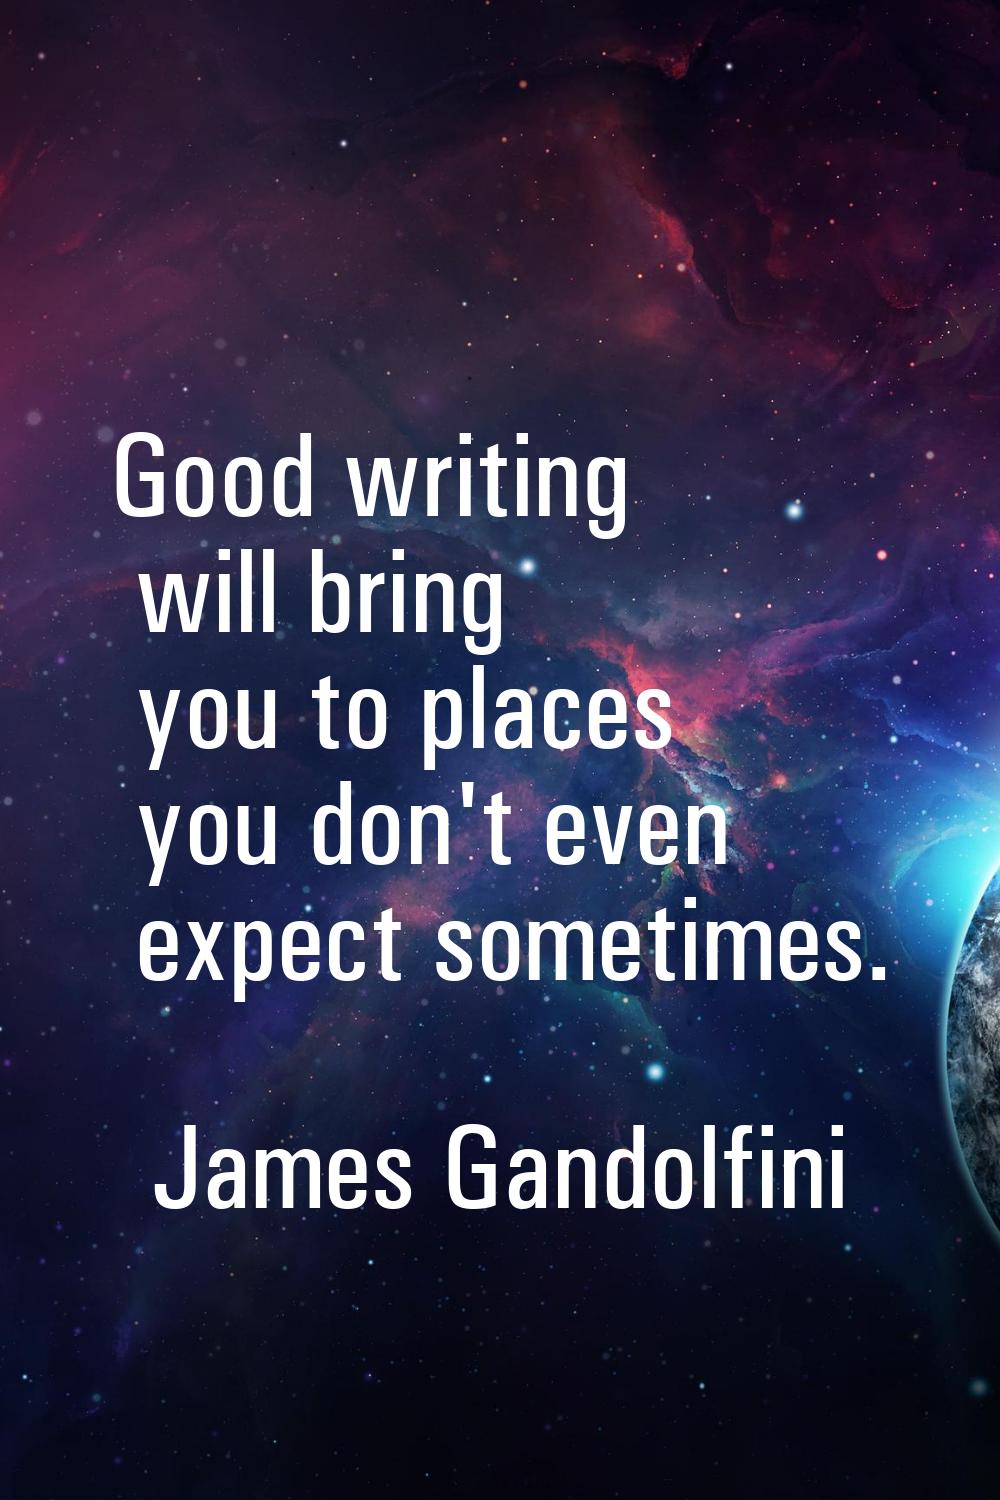 Good writing will bring you to places you don't even expect sometimes.